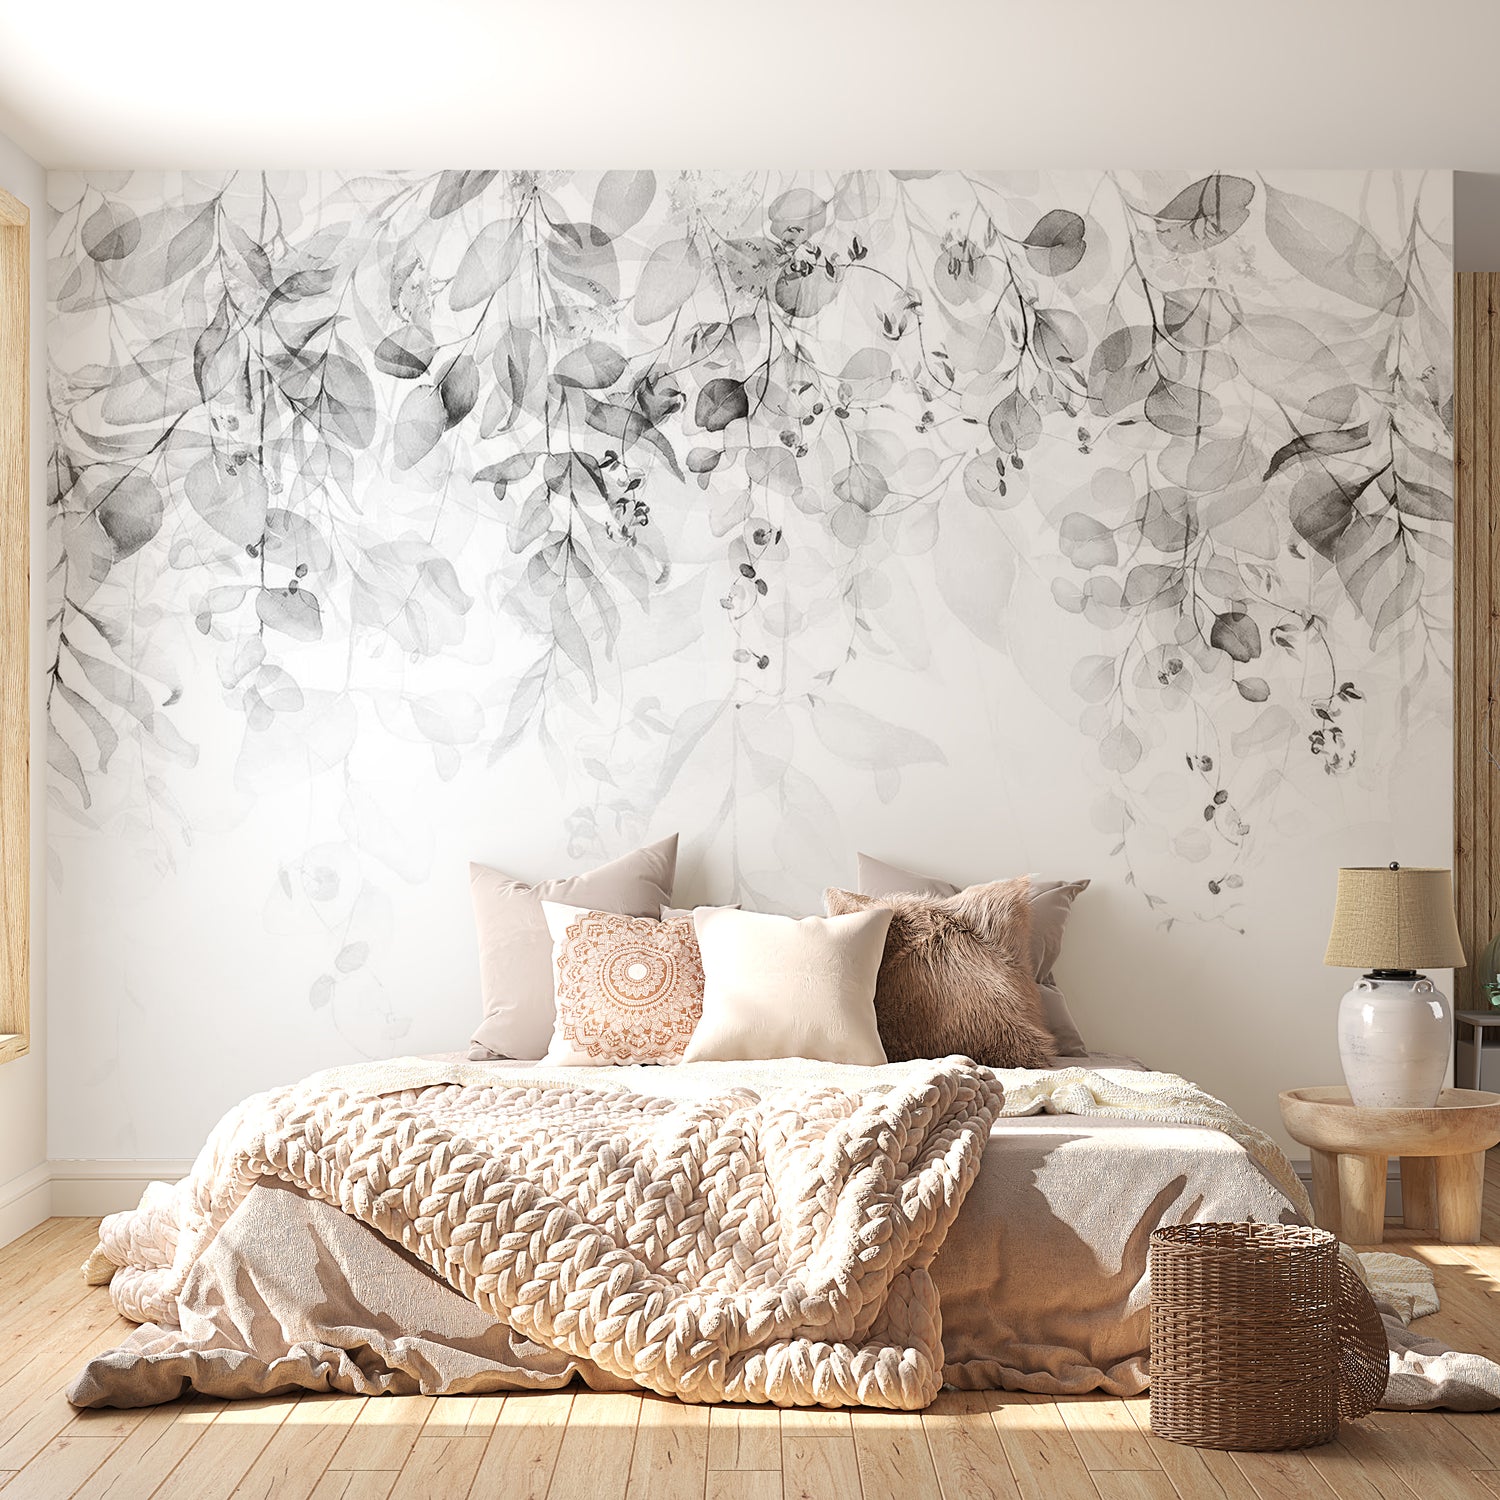 Peel & Stick Botanical Wall Mural - Grey Gentle Touch Of Nature - Removable Wall Decals